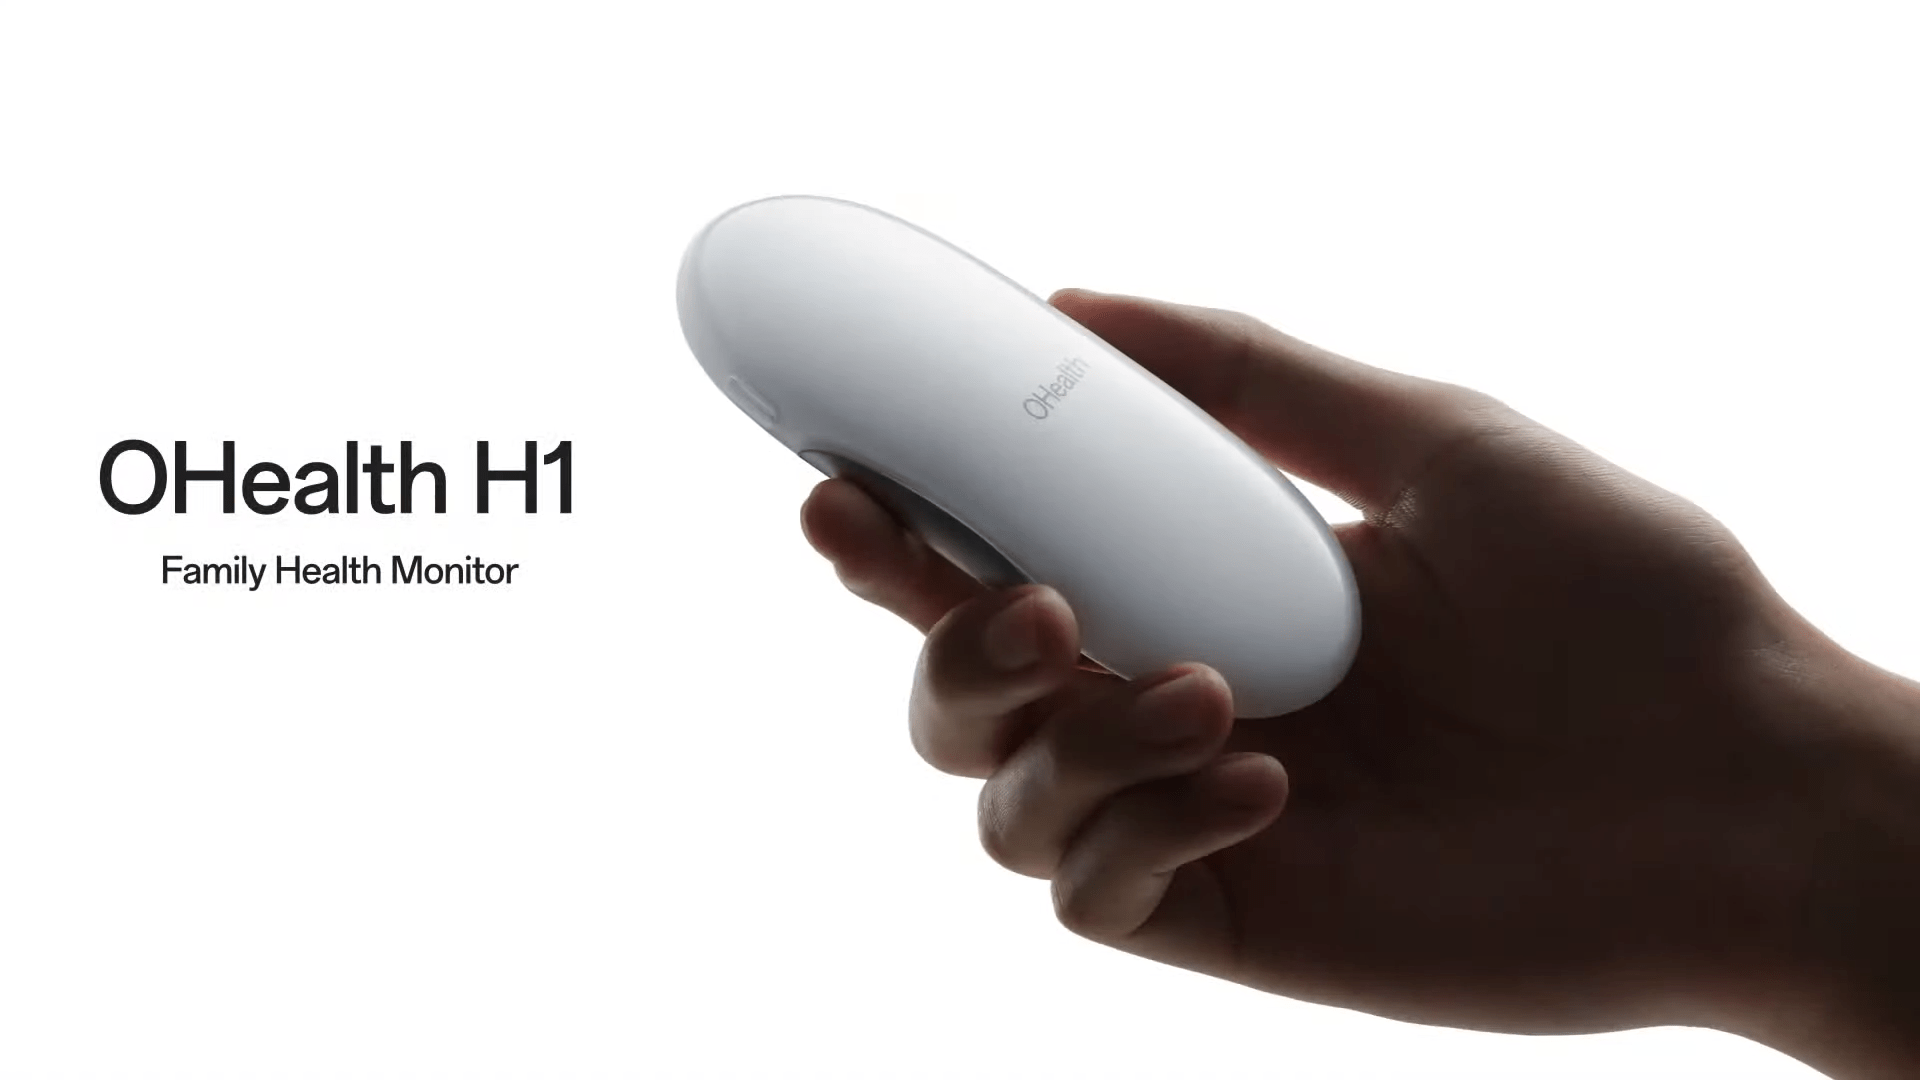 OPPO introduced the OHealth H1: a health monitoring device for the whole family